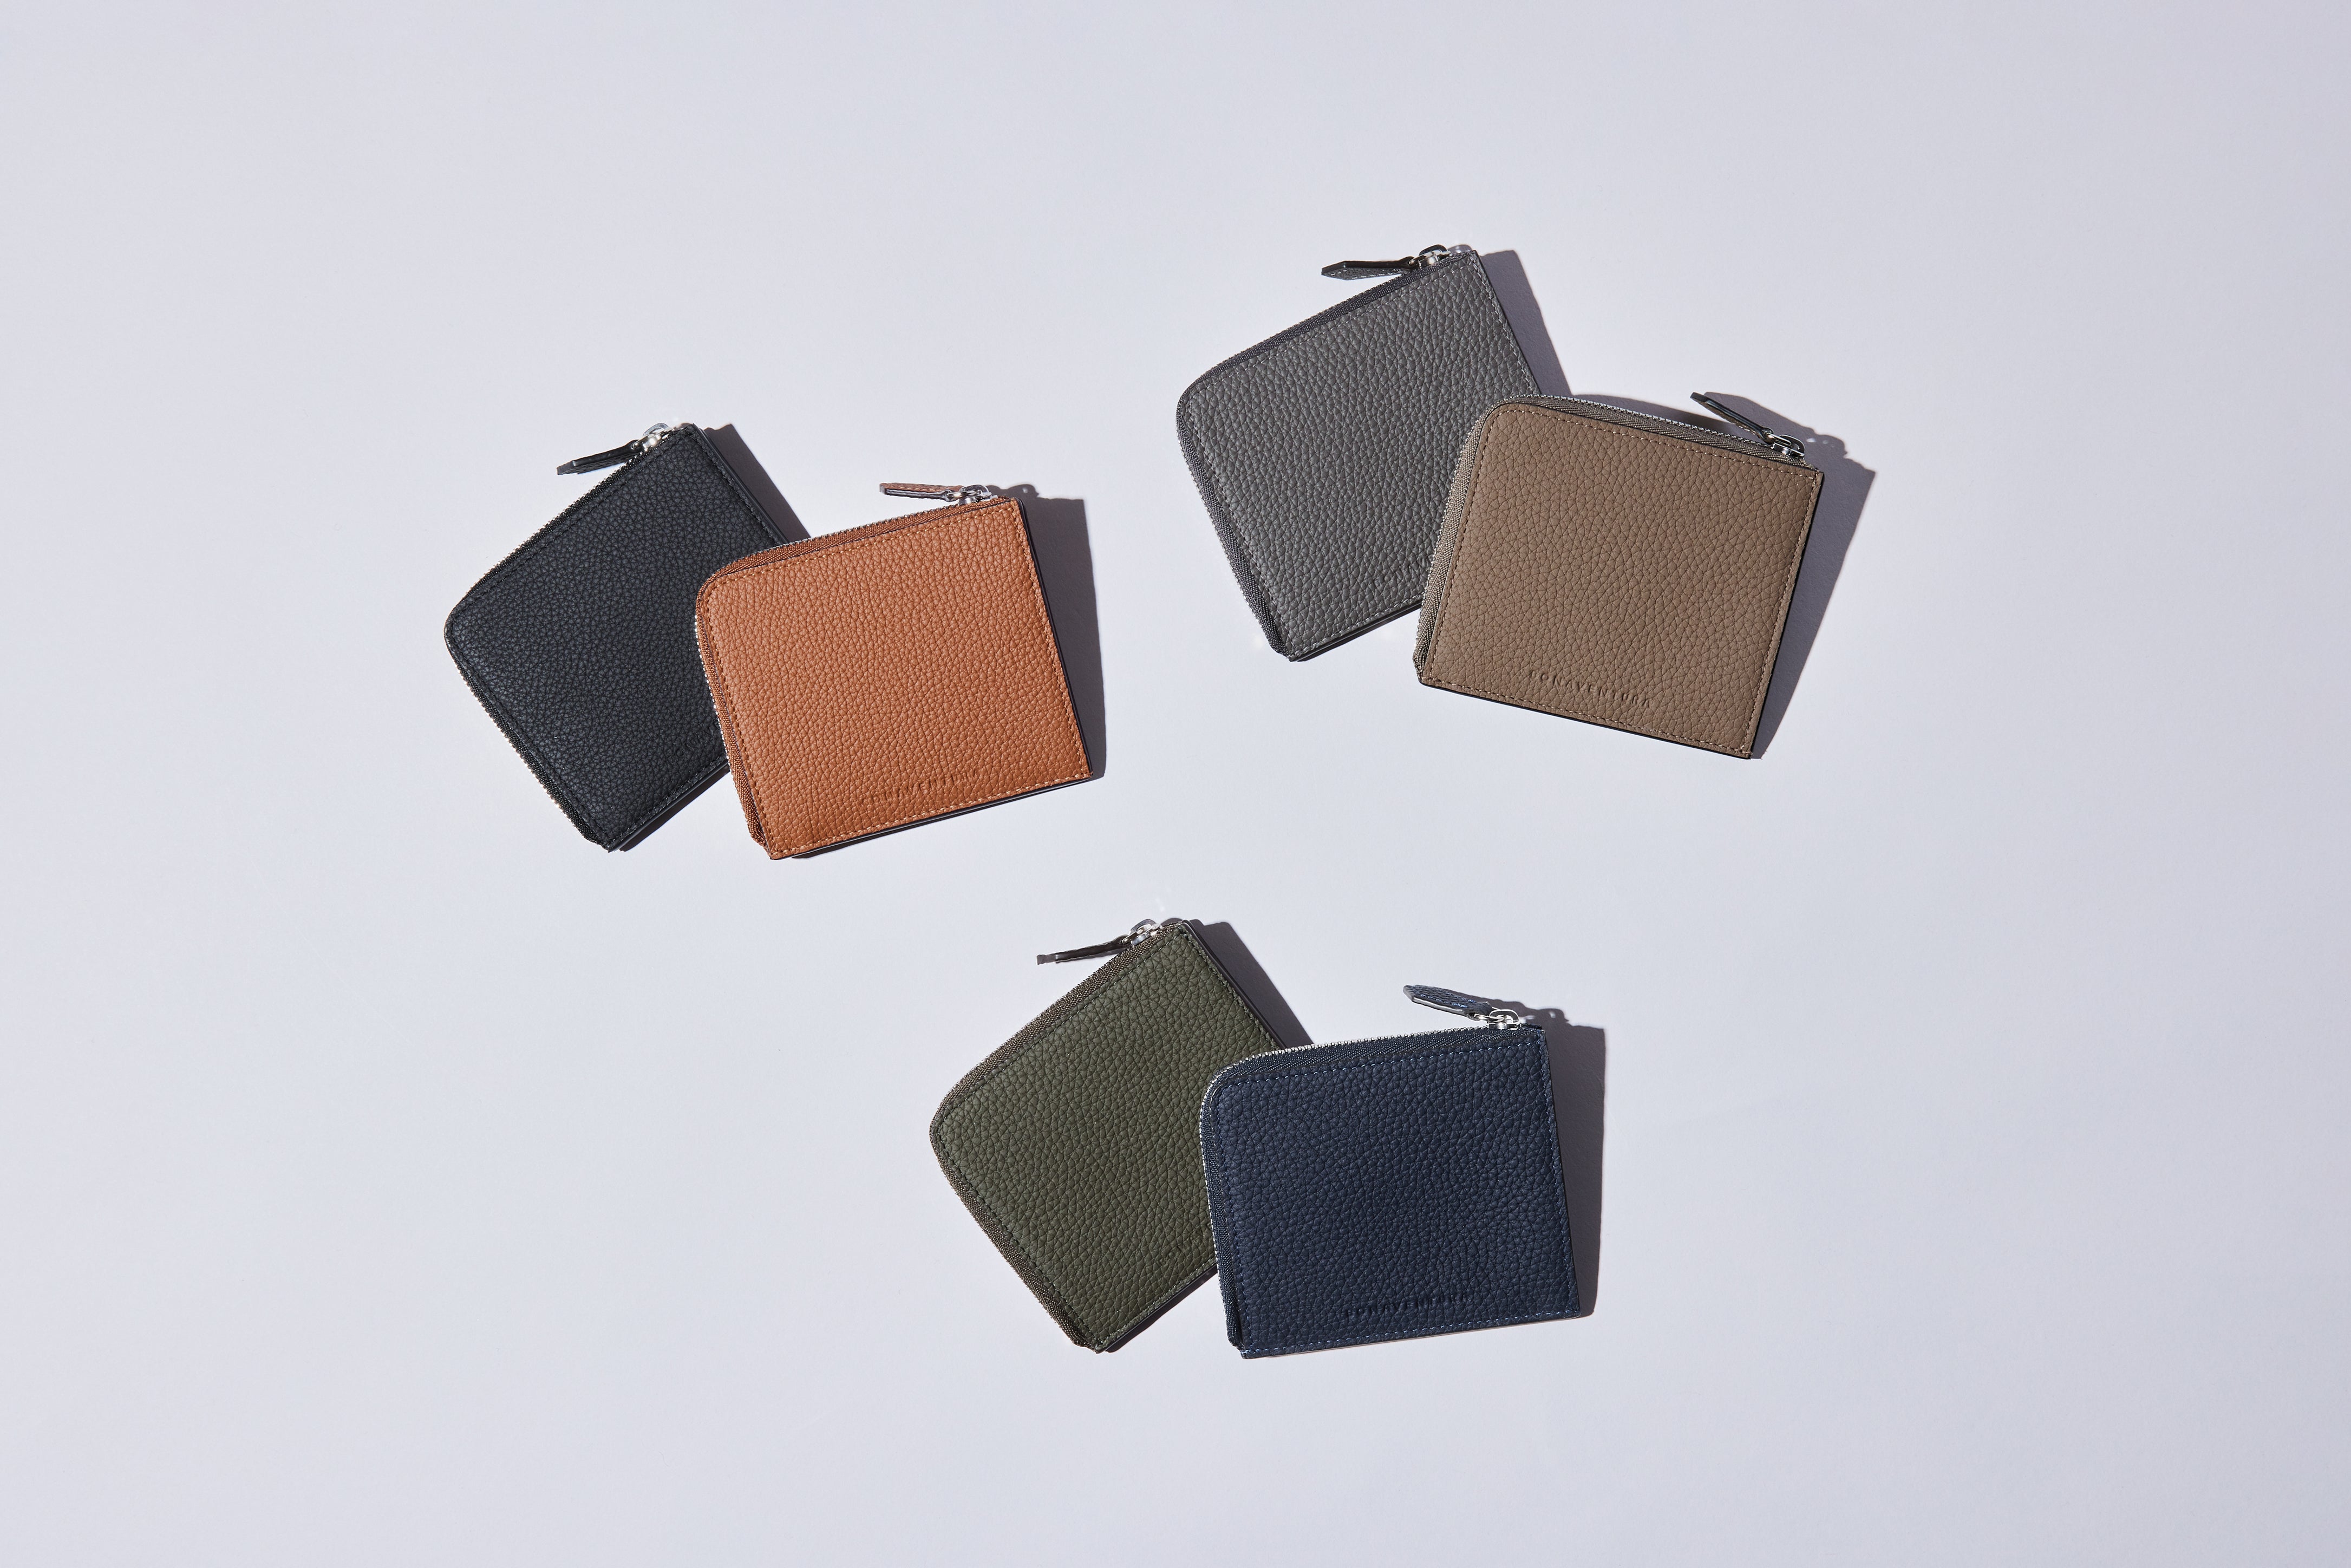 A selection of men's leather wallets in different colors and leather types